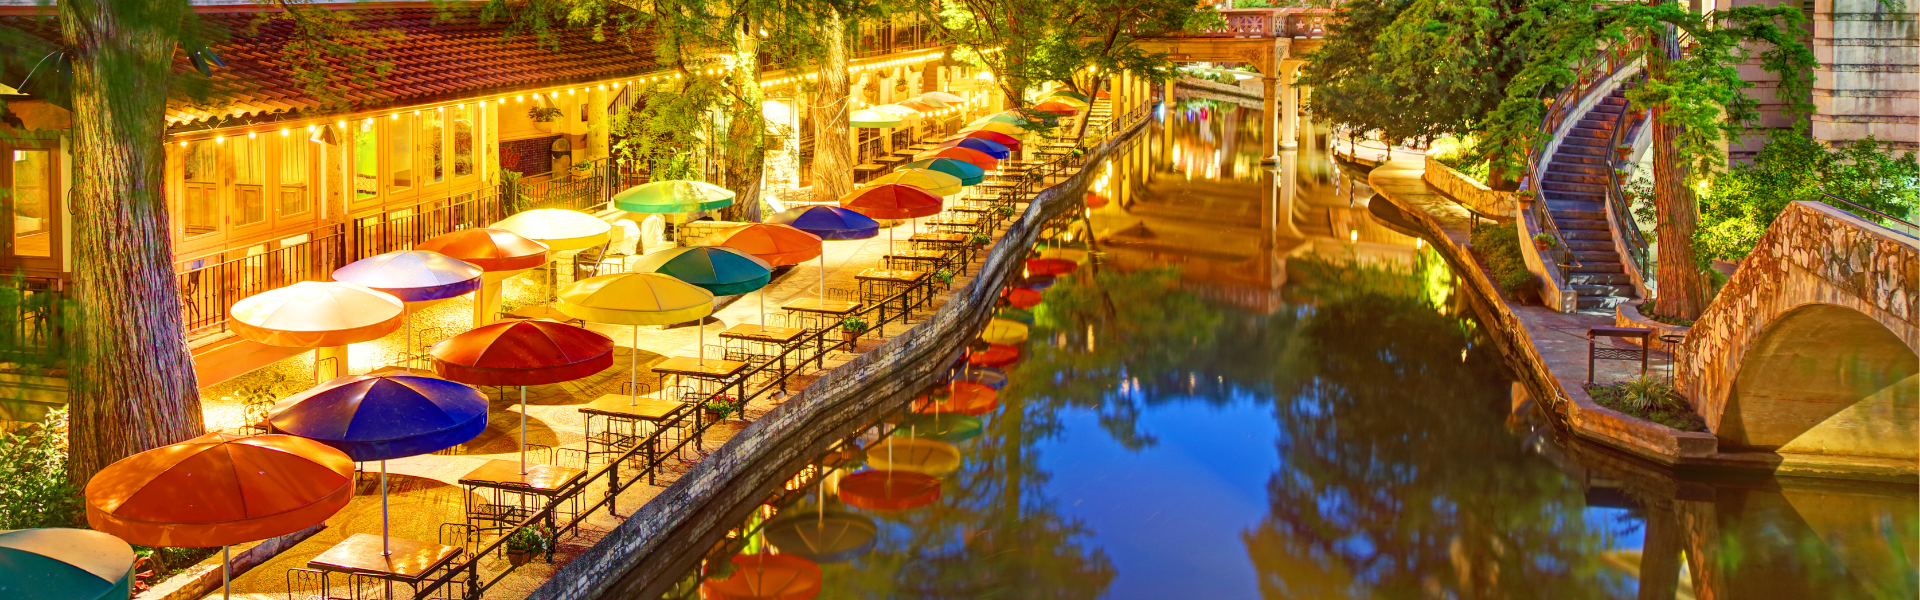 Picture of the San Antonio River Walk with outdoor tables and table umbrellas in different colors